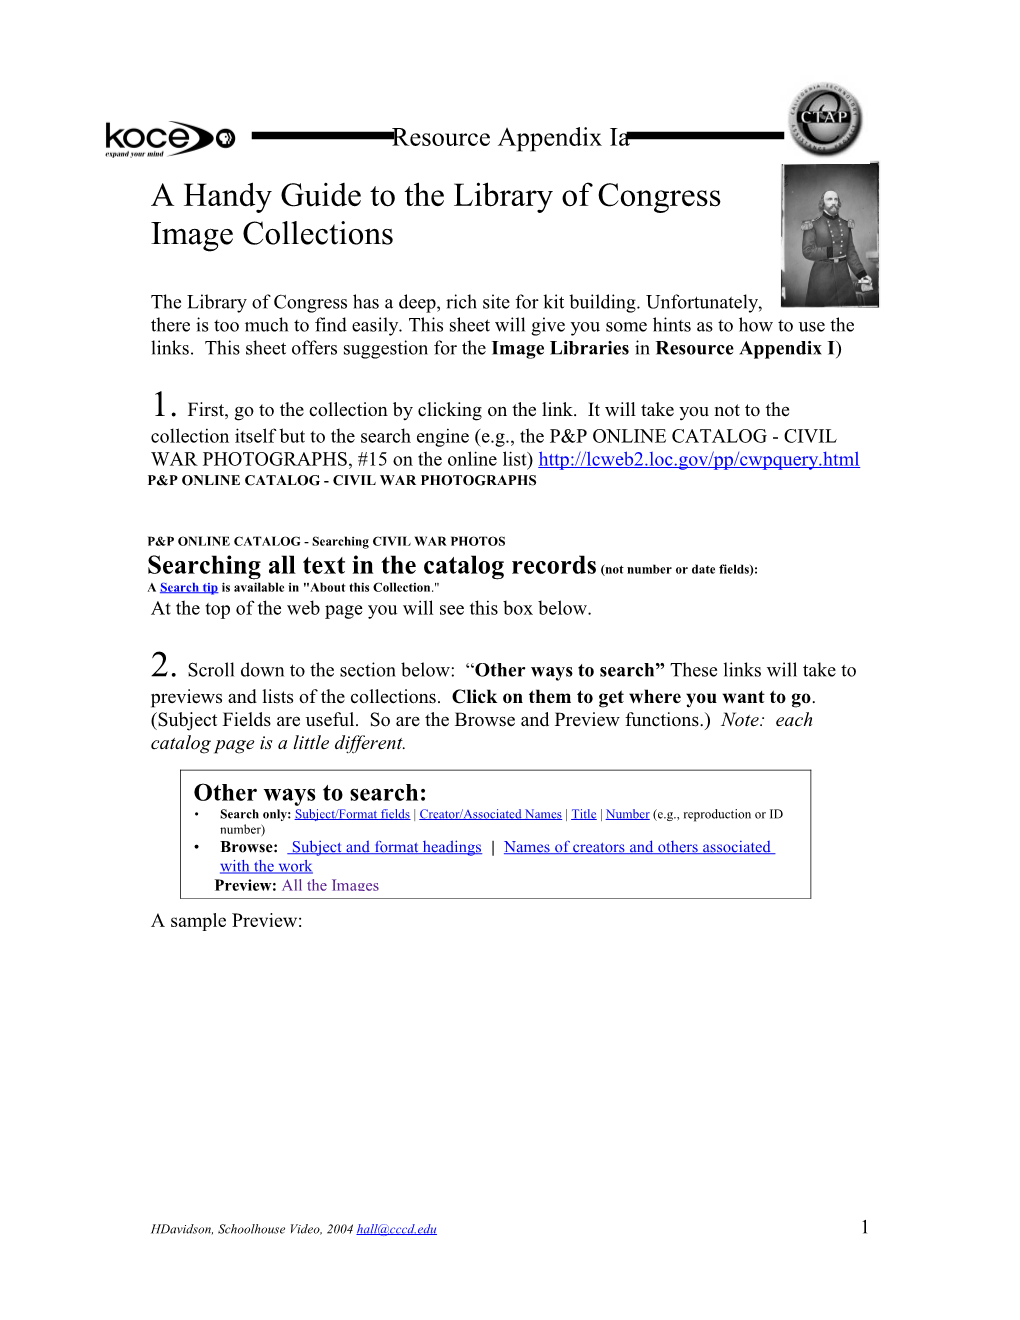 A Handy Guide to the Library of Congress Image Collections